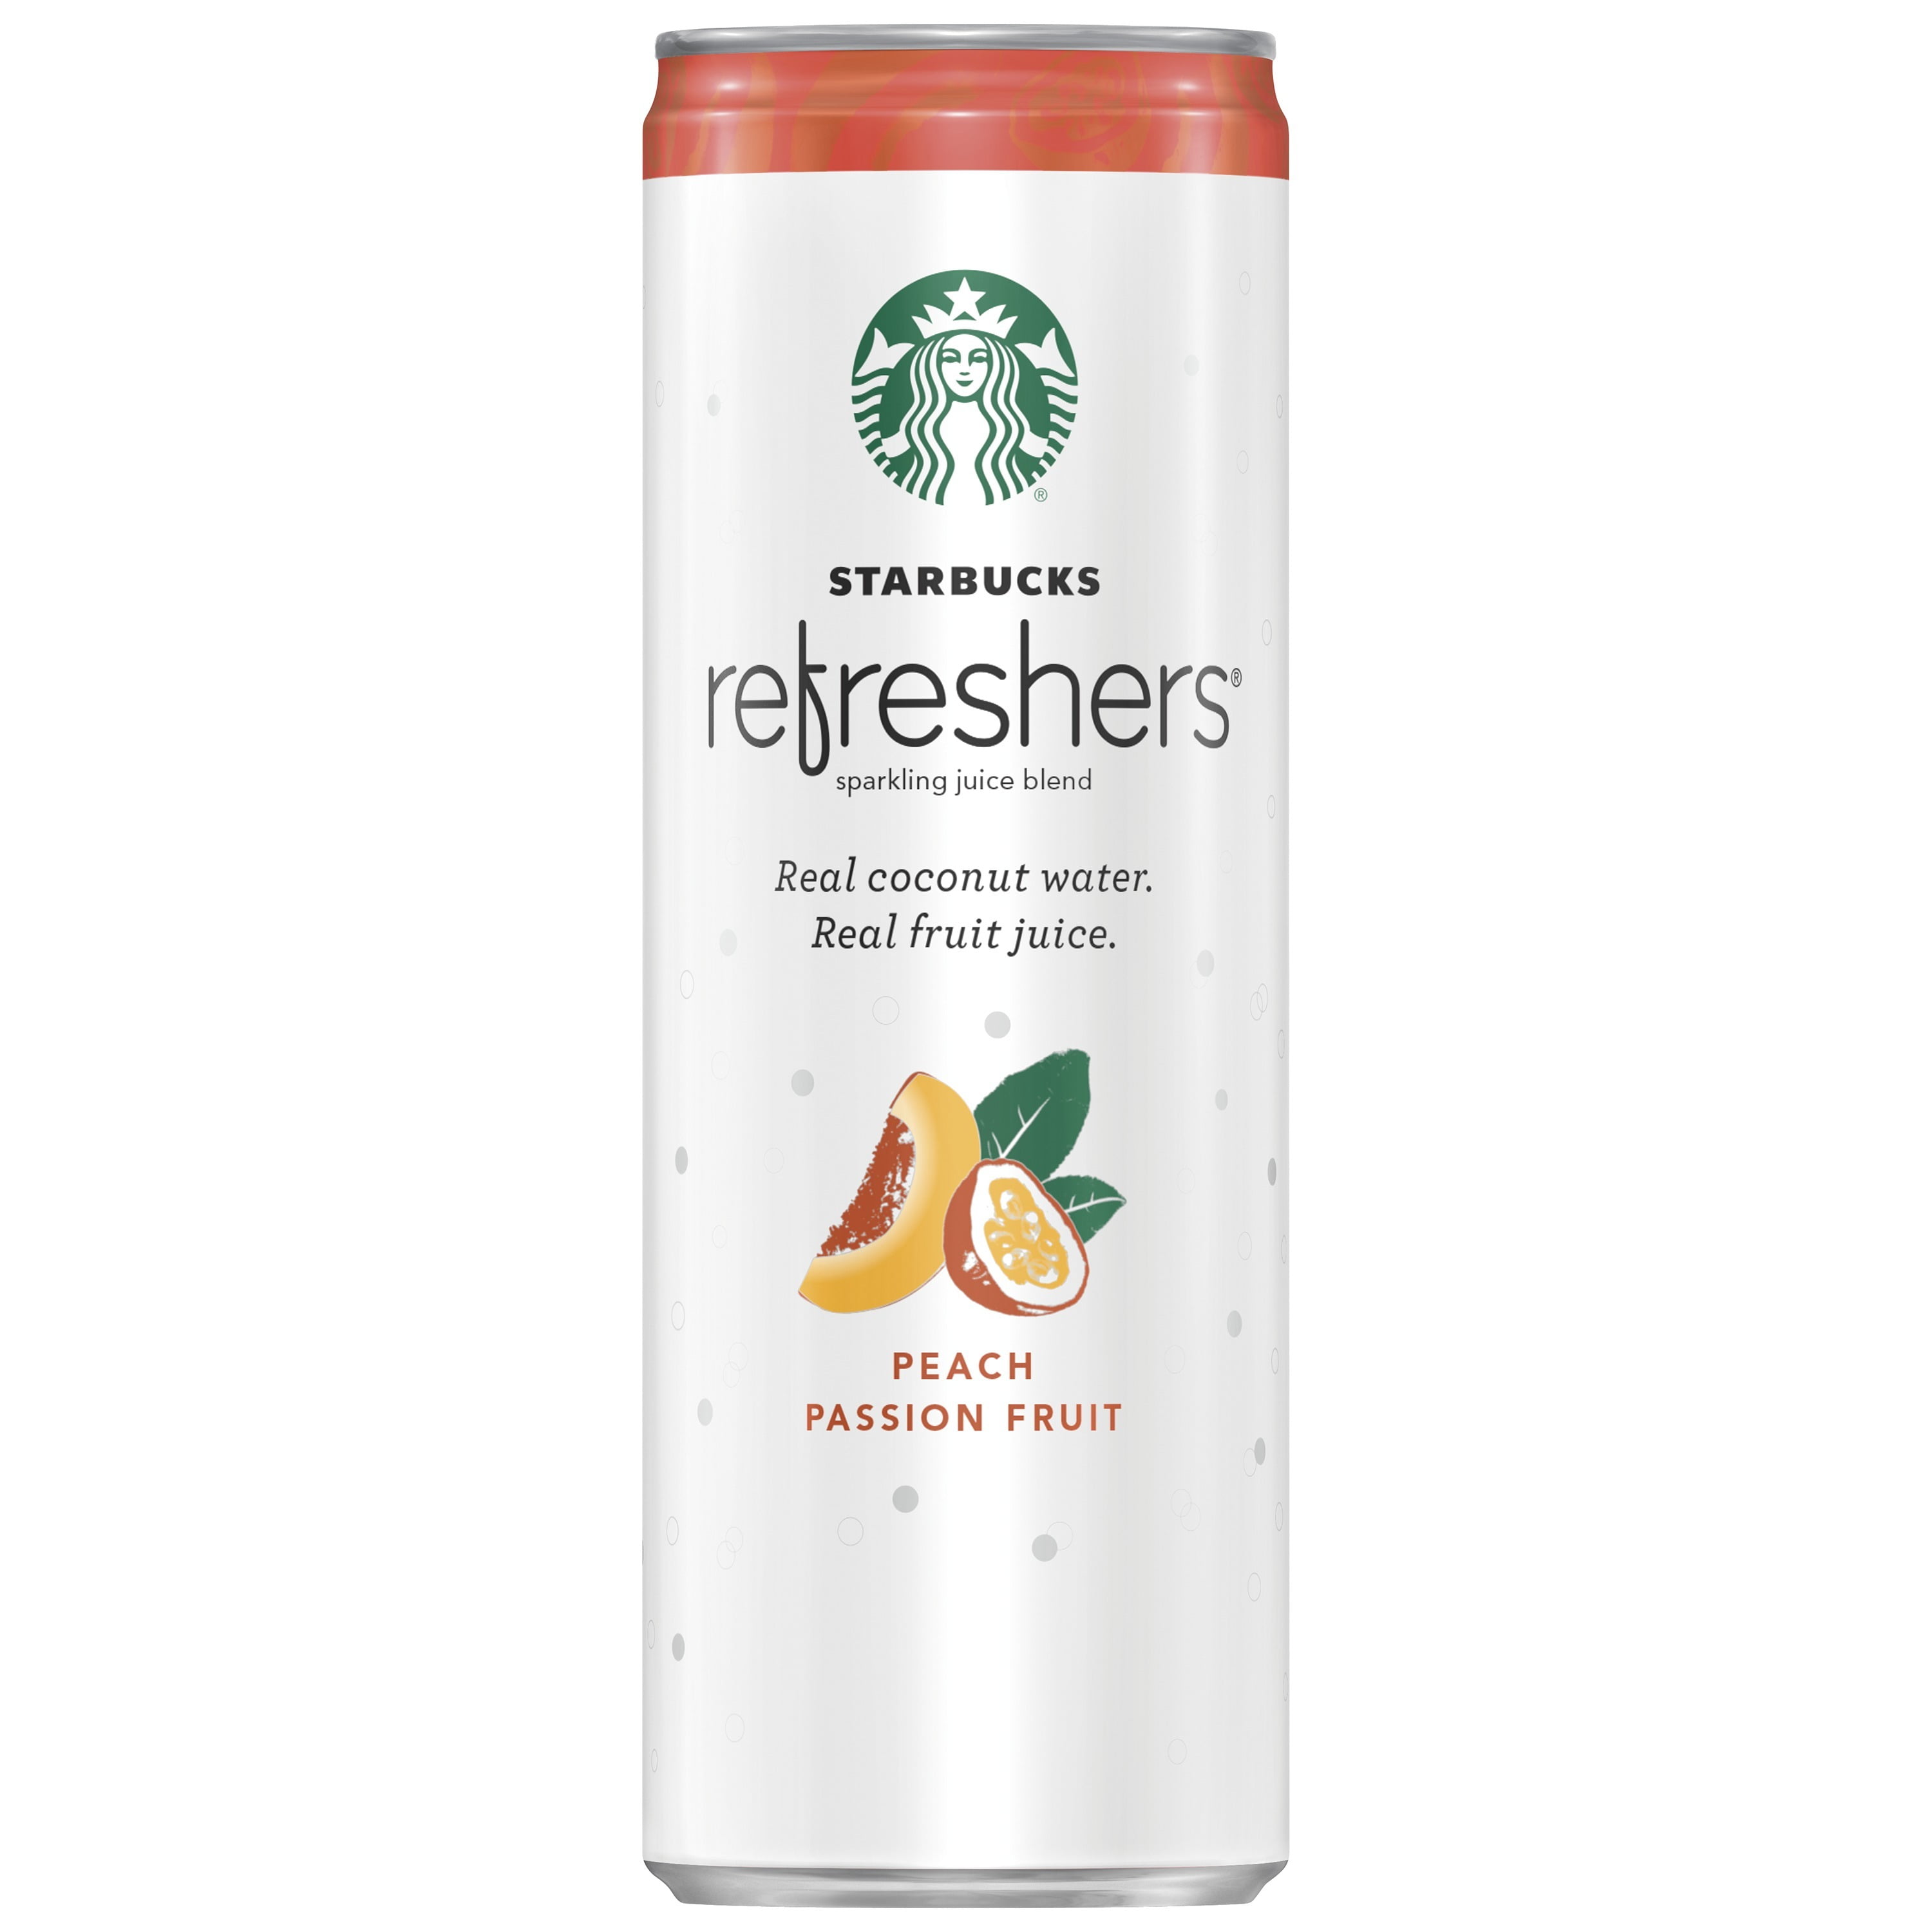 Peach passionfruit recovery drink